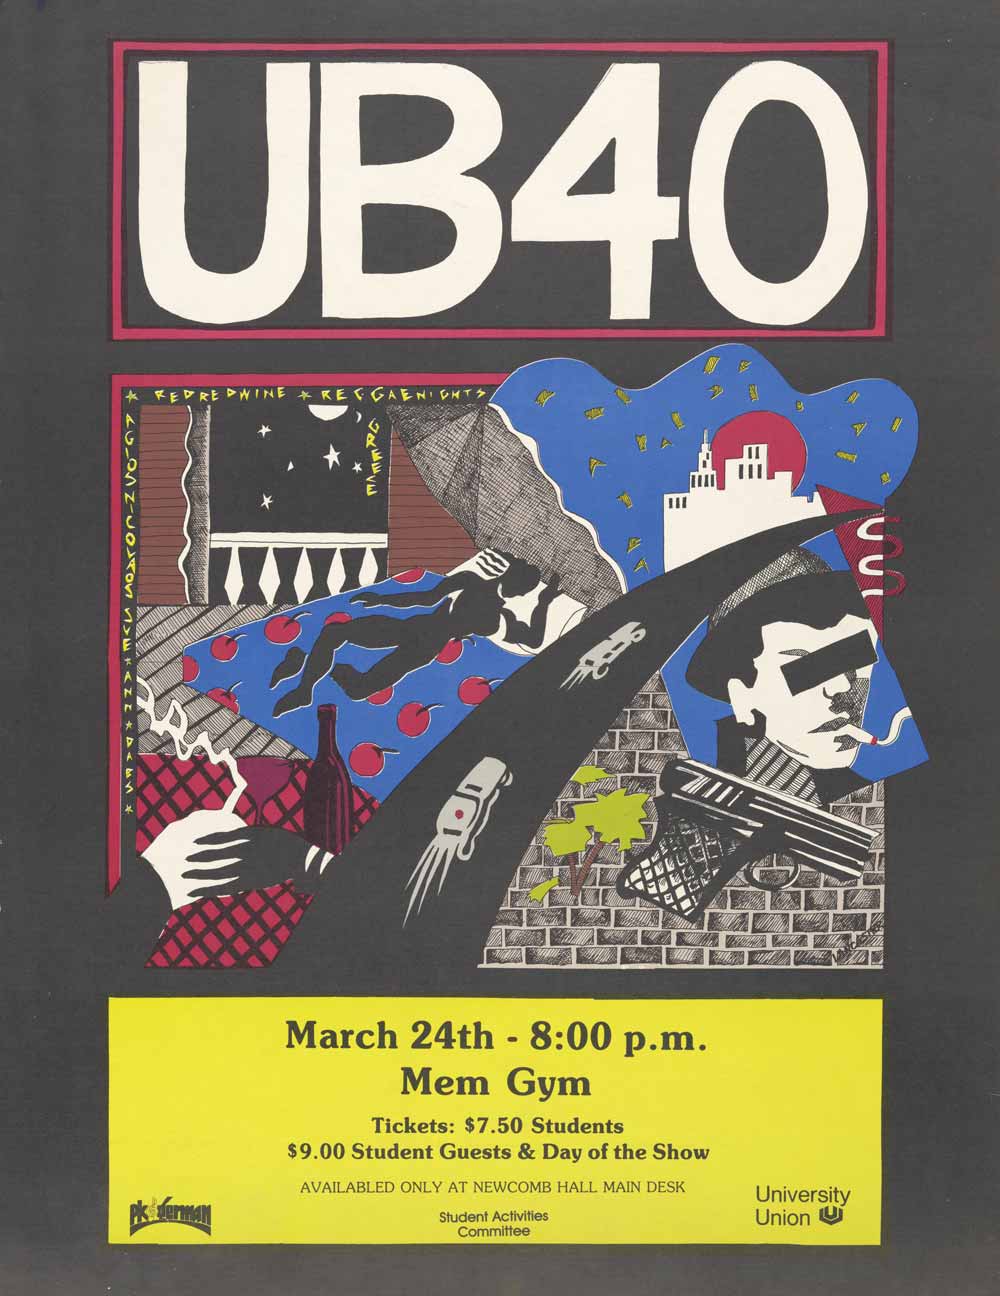 Homemade concert poster from when UB40 visited UVA in the 1980s